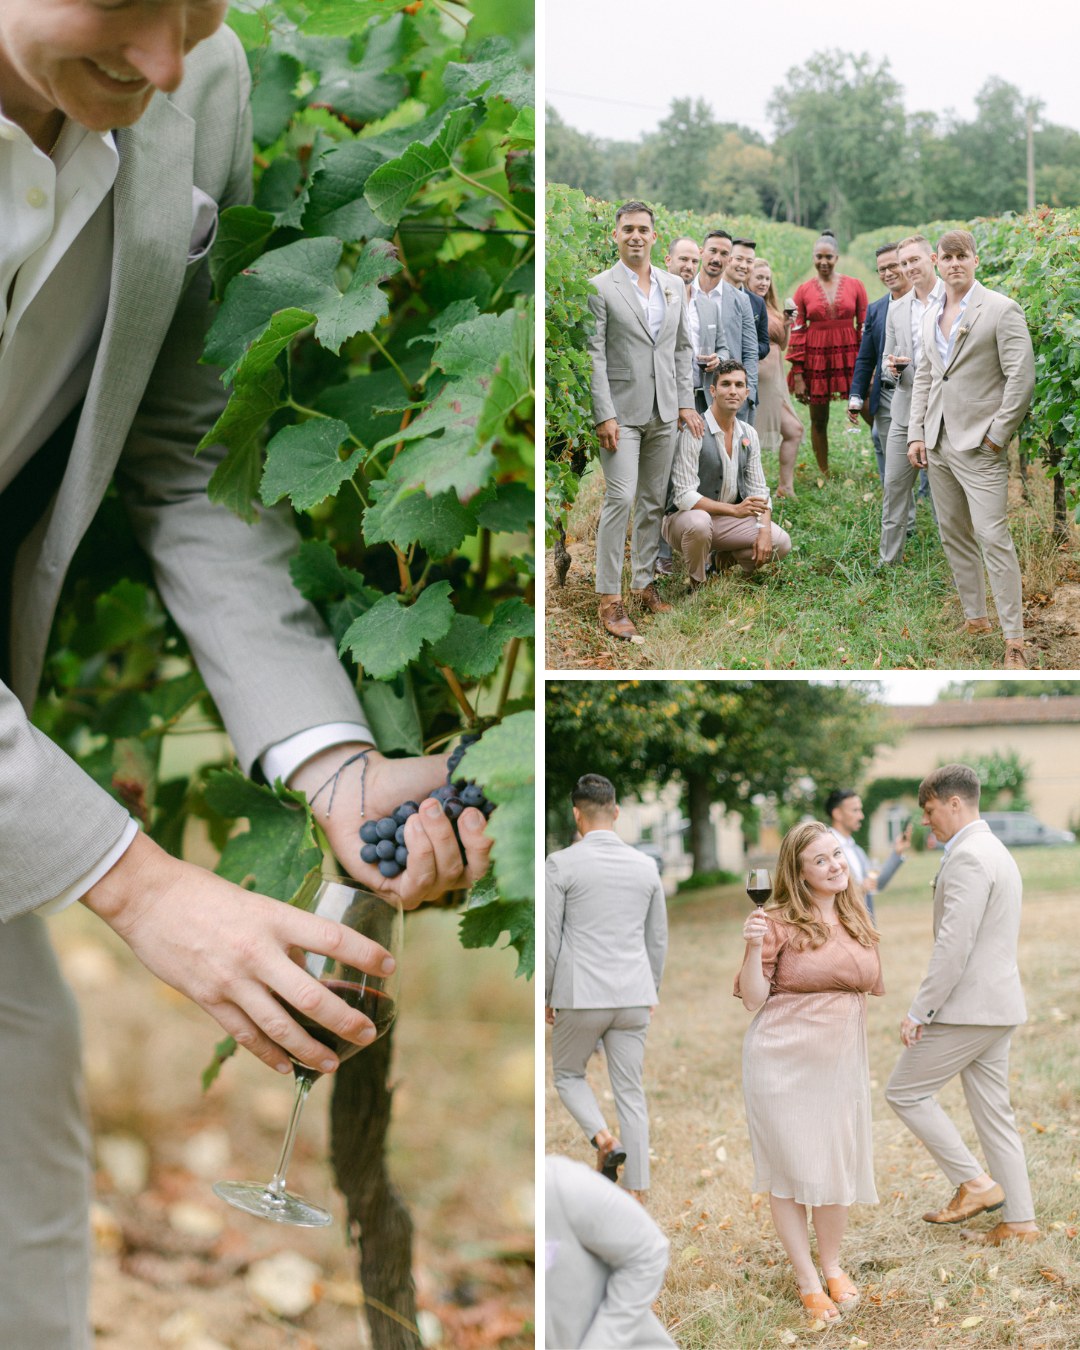 A collage of three images from a vineyard: Top left shows a person holding a bunch of grapes; Top right features a group of people in formal attire posing among the vines; Bottom right shows a woman in a beige dress smiling while others walk away in the background.